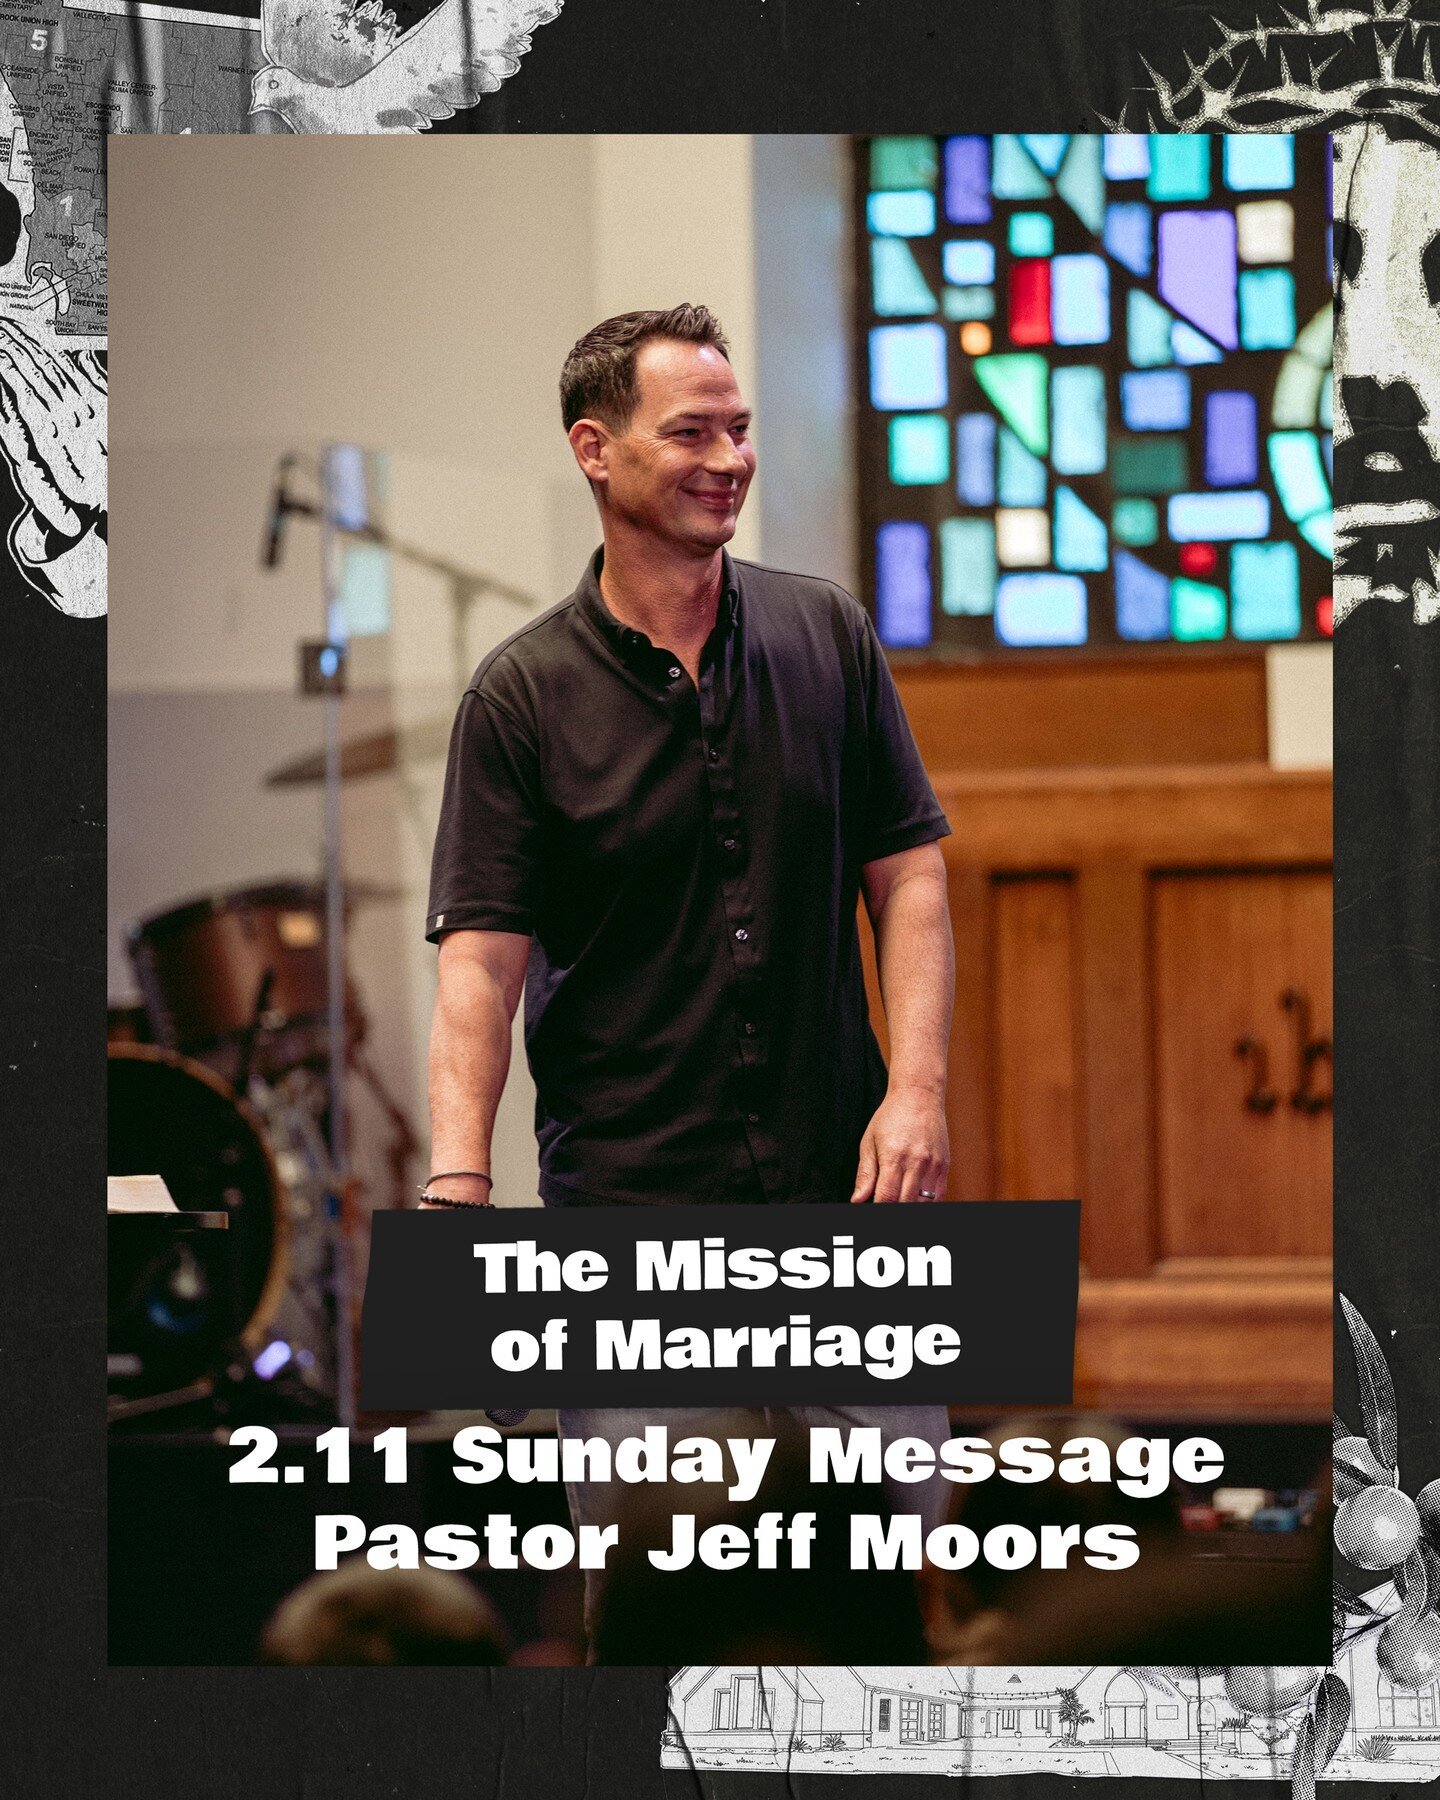 Sunday 2.11 recap! Yesterday we continued our &quot;Grit and Grace&quot; series and welcomed back Pastor @jeffmoors with the message titled &quot;The Mission of Marriage&quot;. This is great for everyone whether single, married, or even if that isn't